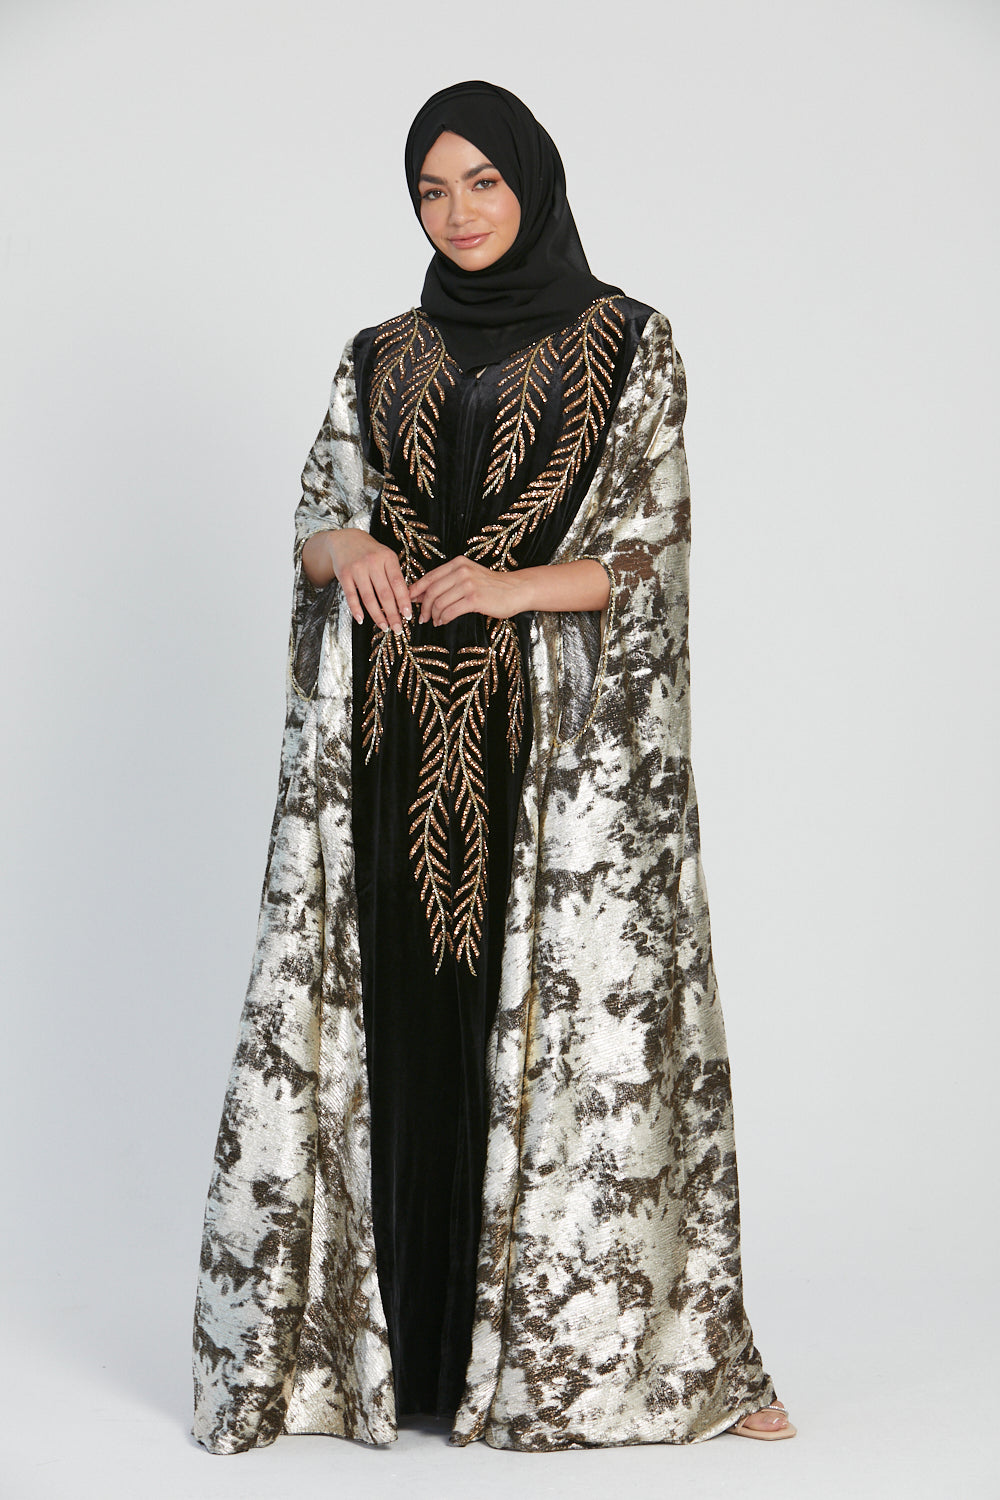 Luxury Bronze Palm Leaf Cape with Gold Abstract